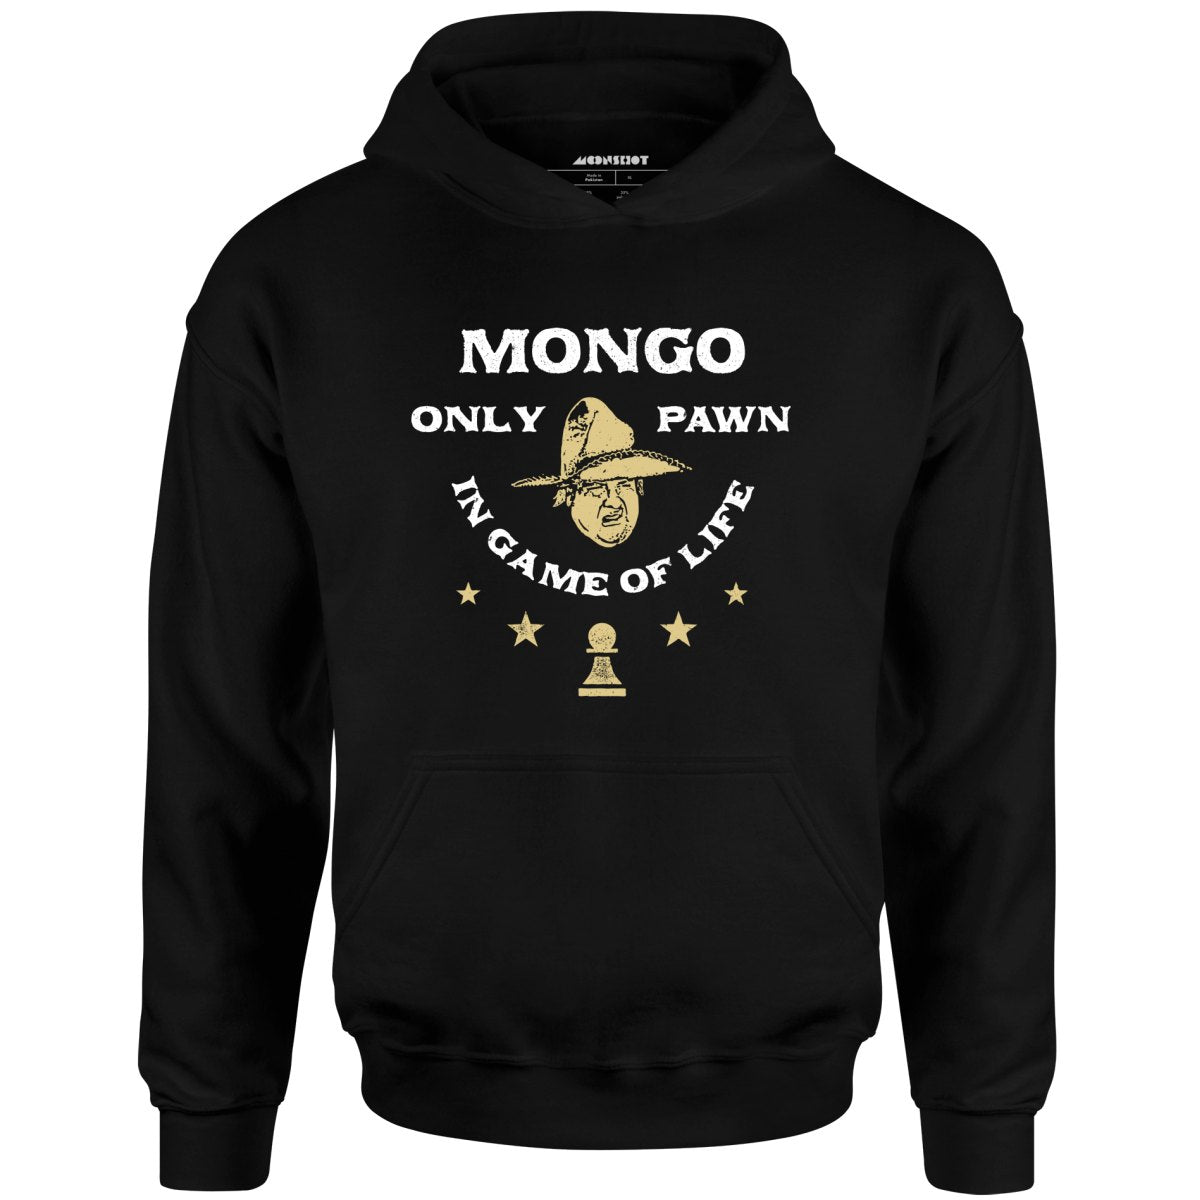 Mongo Only Pawn in Game of Life - Unisex Hoodie